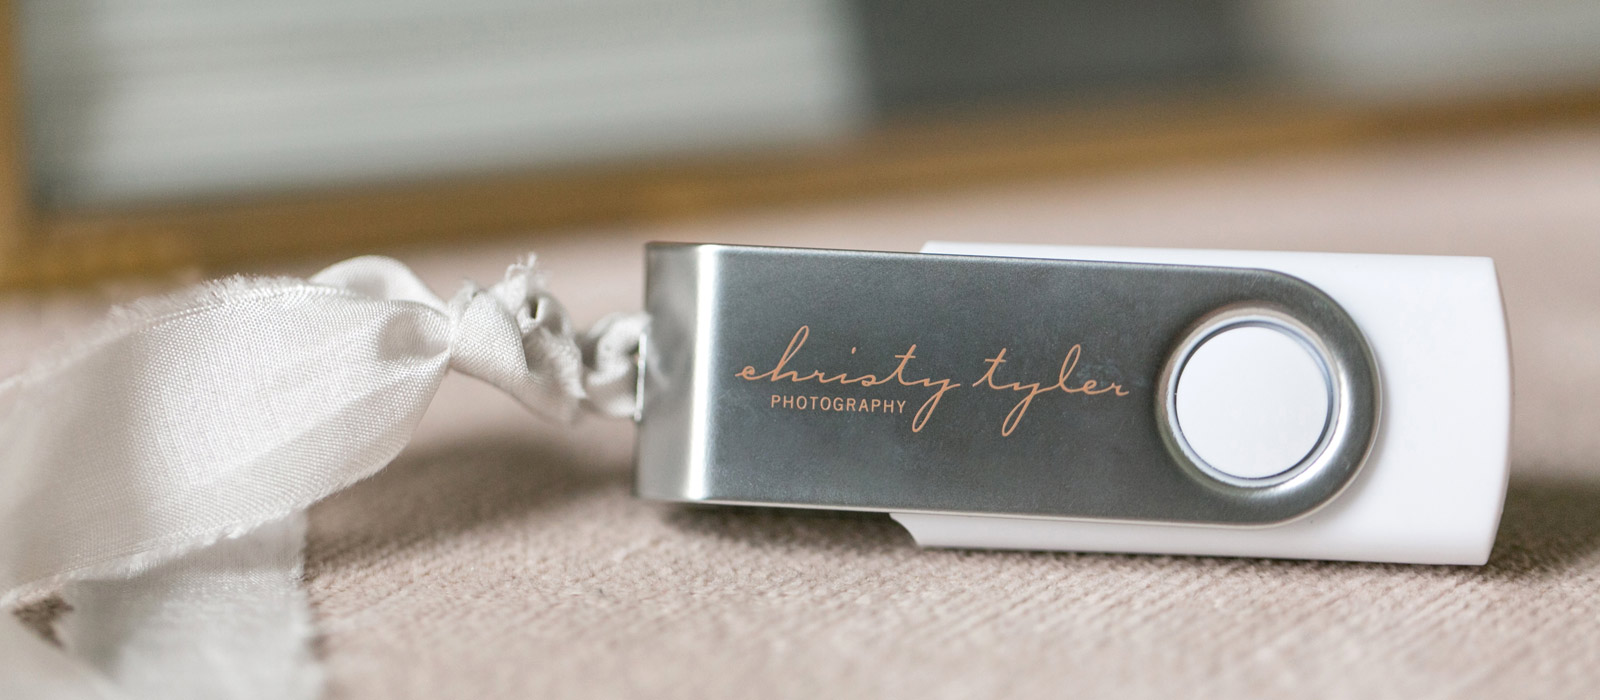 Christy Tyler Photography Flash Drives